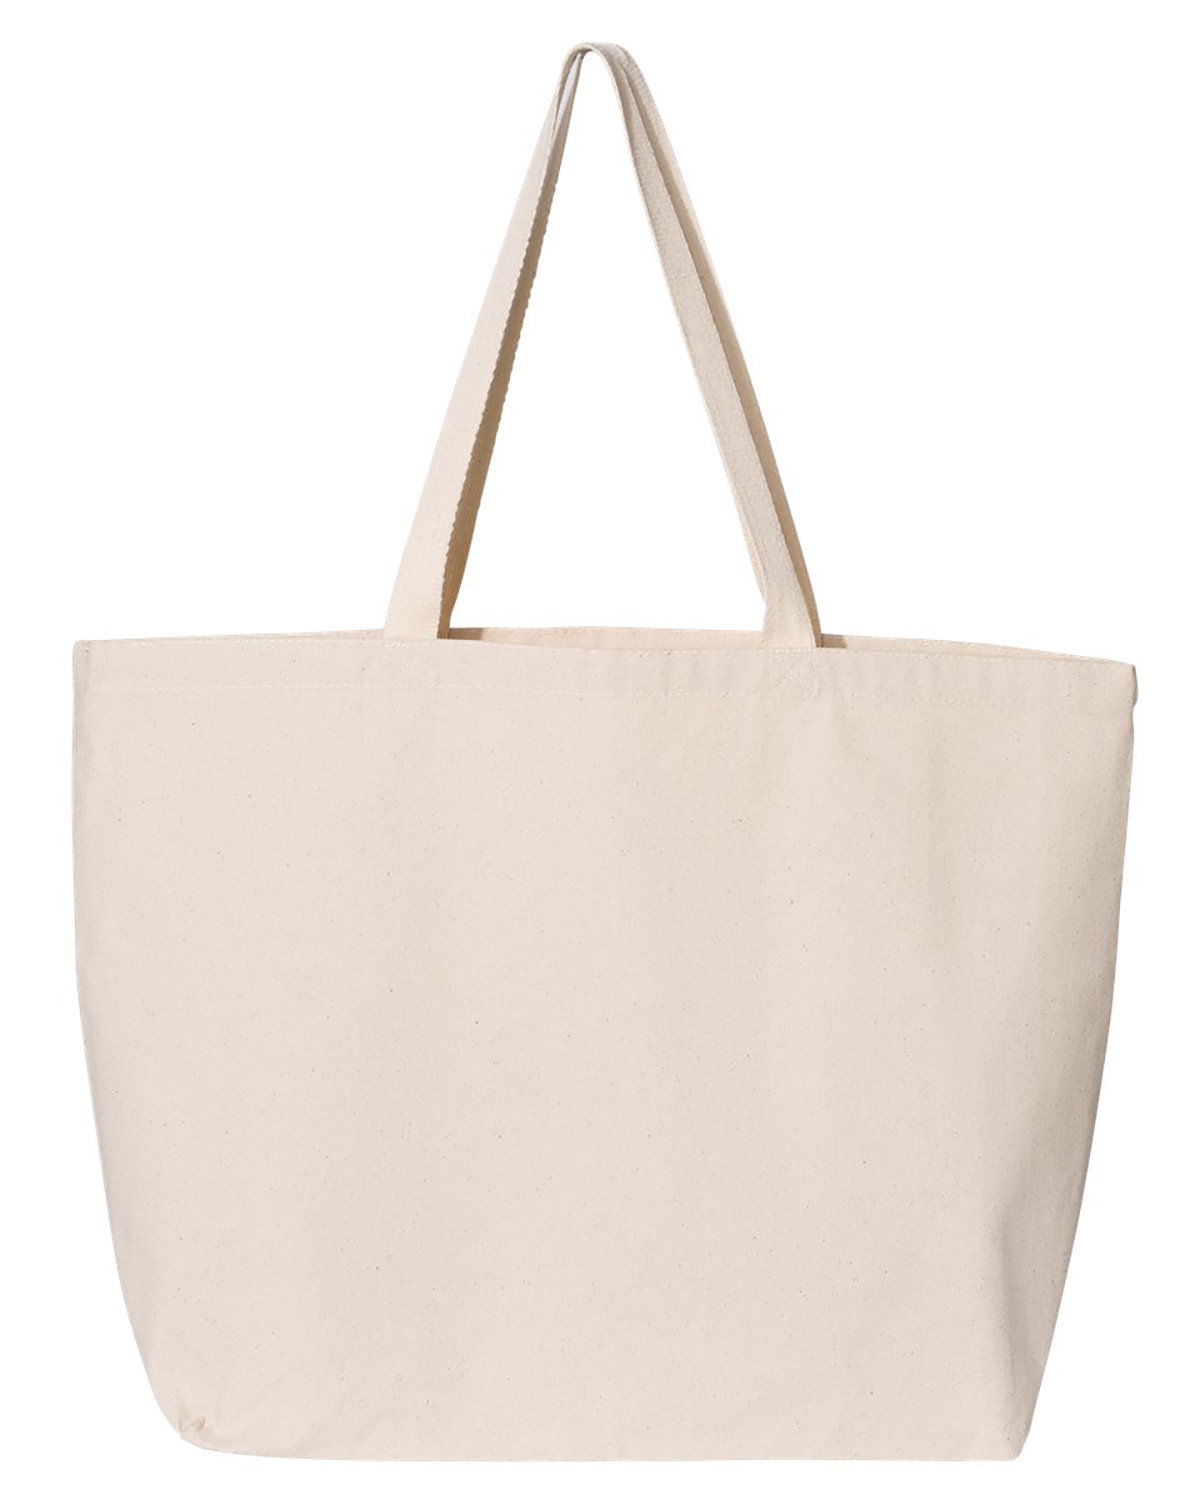 OAD Jumbo 12 oz Gusseted Tote | US Generic Non-Priced